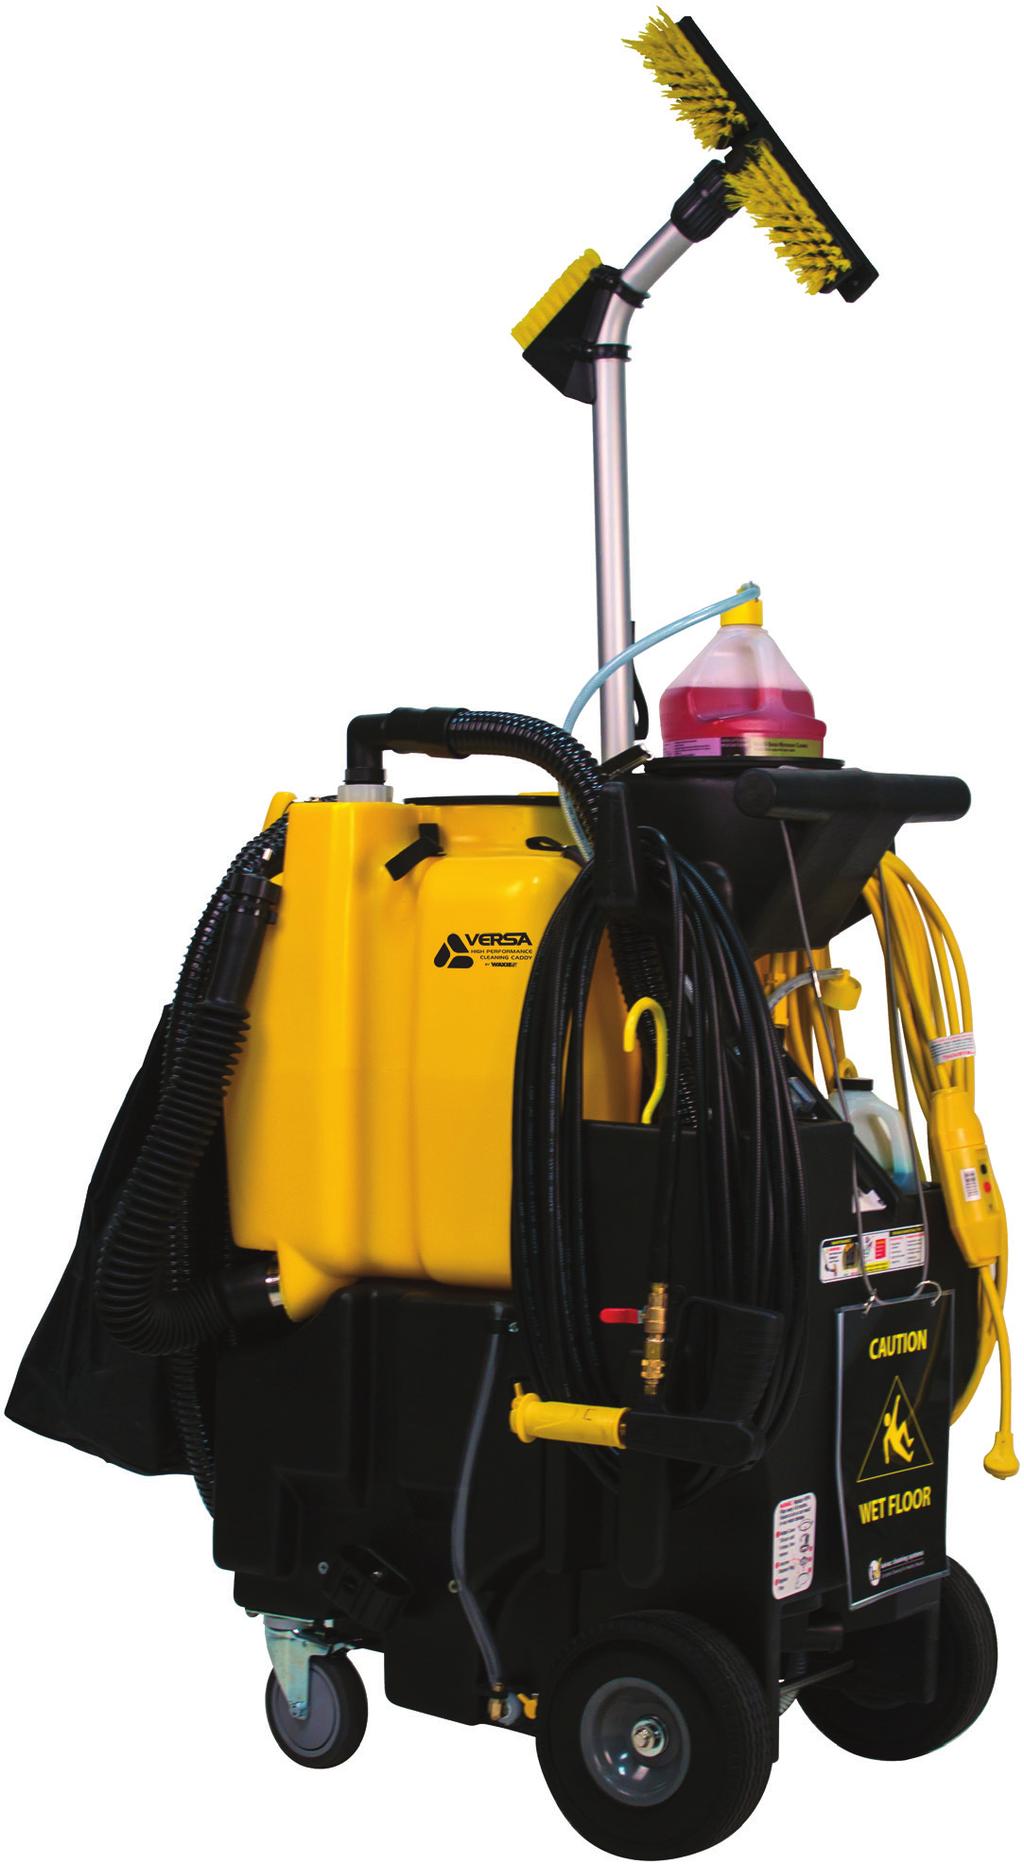 VERSA & VERSA II High Performance Cleaning Caddies by WAXIE are designed as versatile whole building touchless cleaning machines.